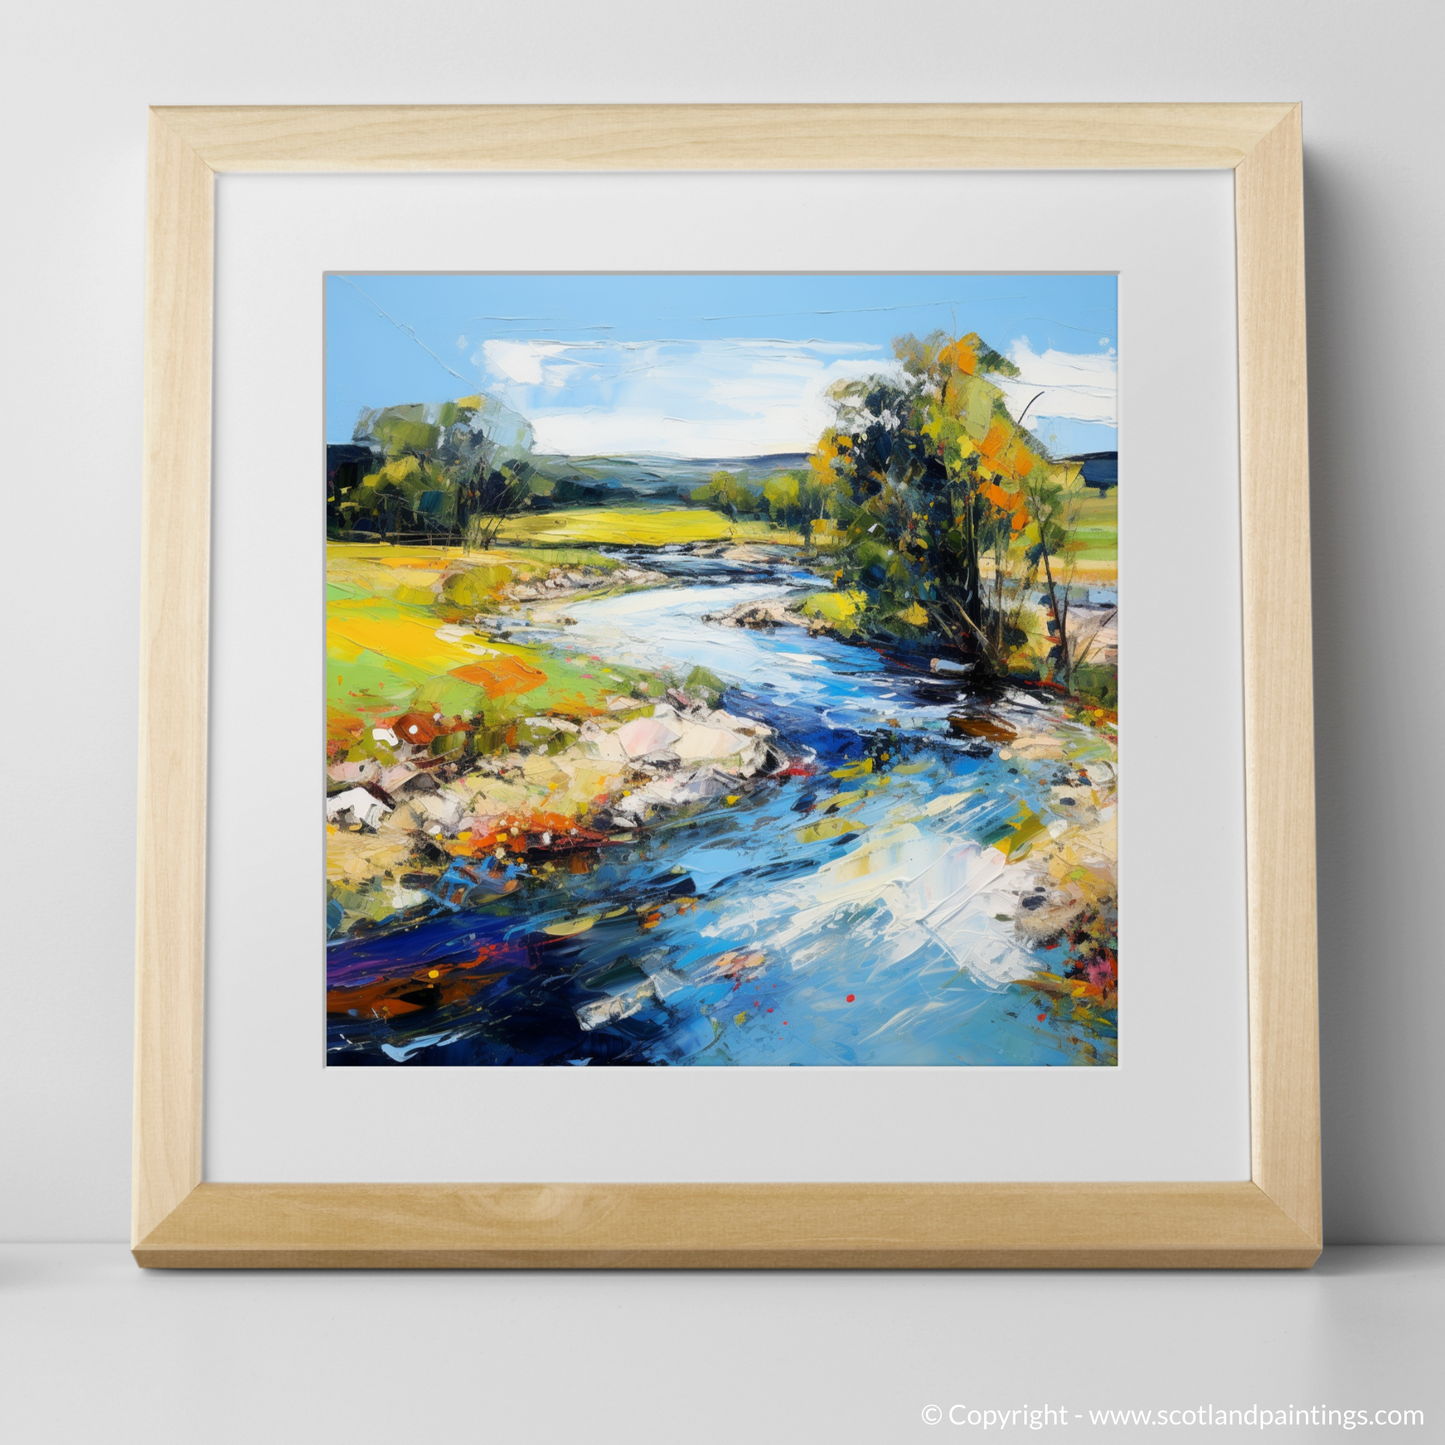 Art Print of River Deveron, Aberdeenshire in summer with a natural frame